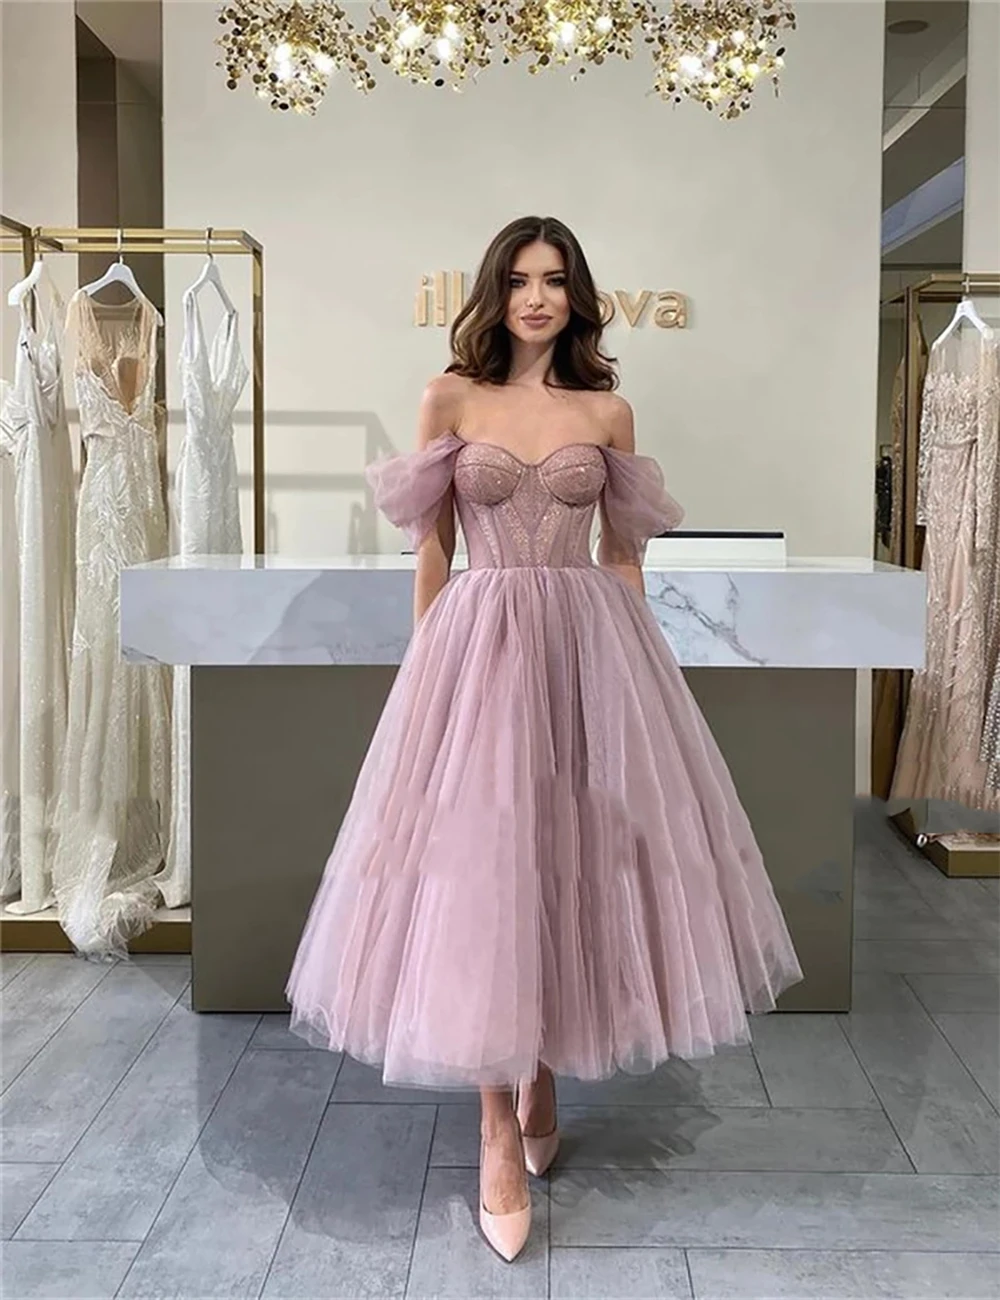 Simple Tulle Prom Dresses Off Shoulder Sleeveless Ankle-length Formal Evening Party Gowns Bone Homecoming Dress For Women Prom Dresses | lupon.gov.ph